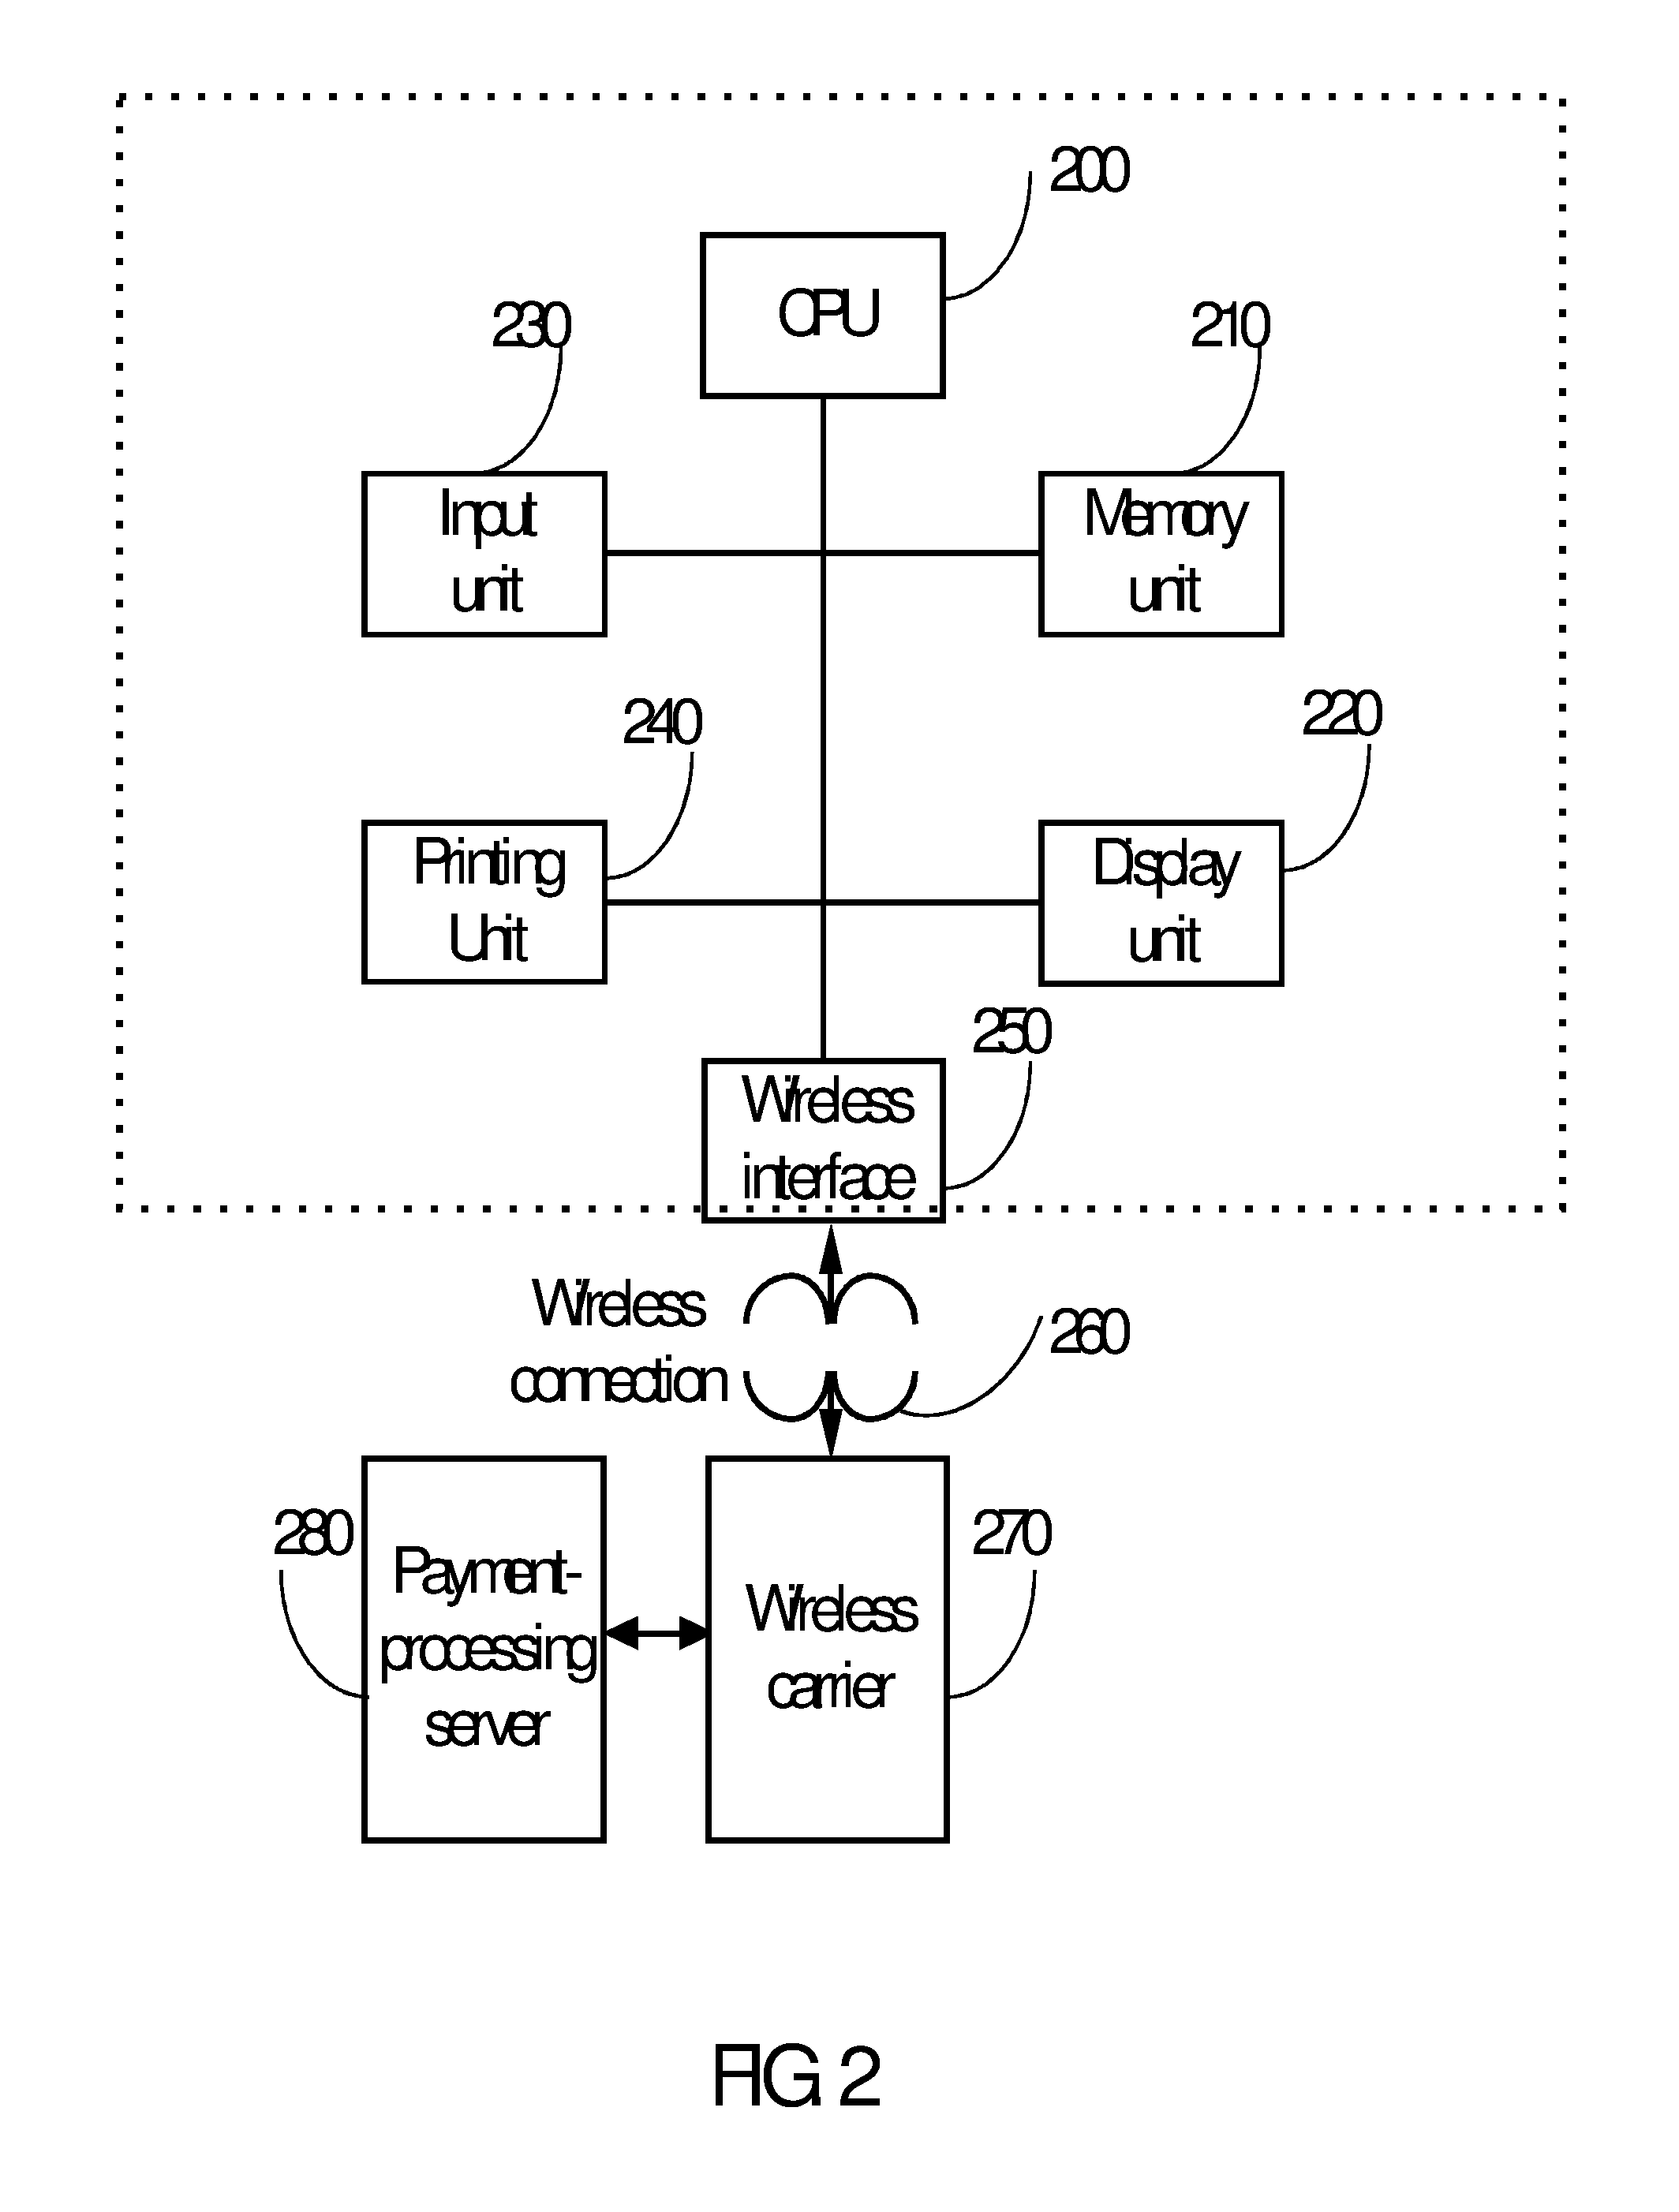 Method of processing credit payments at delivery